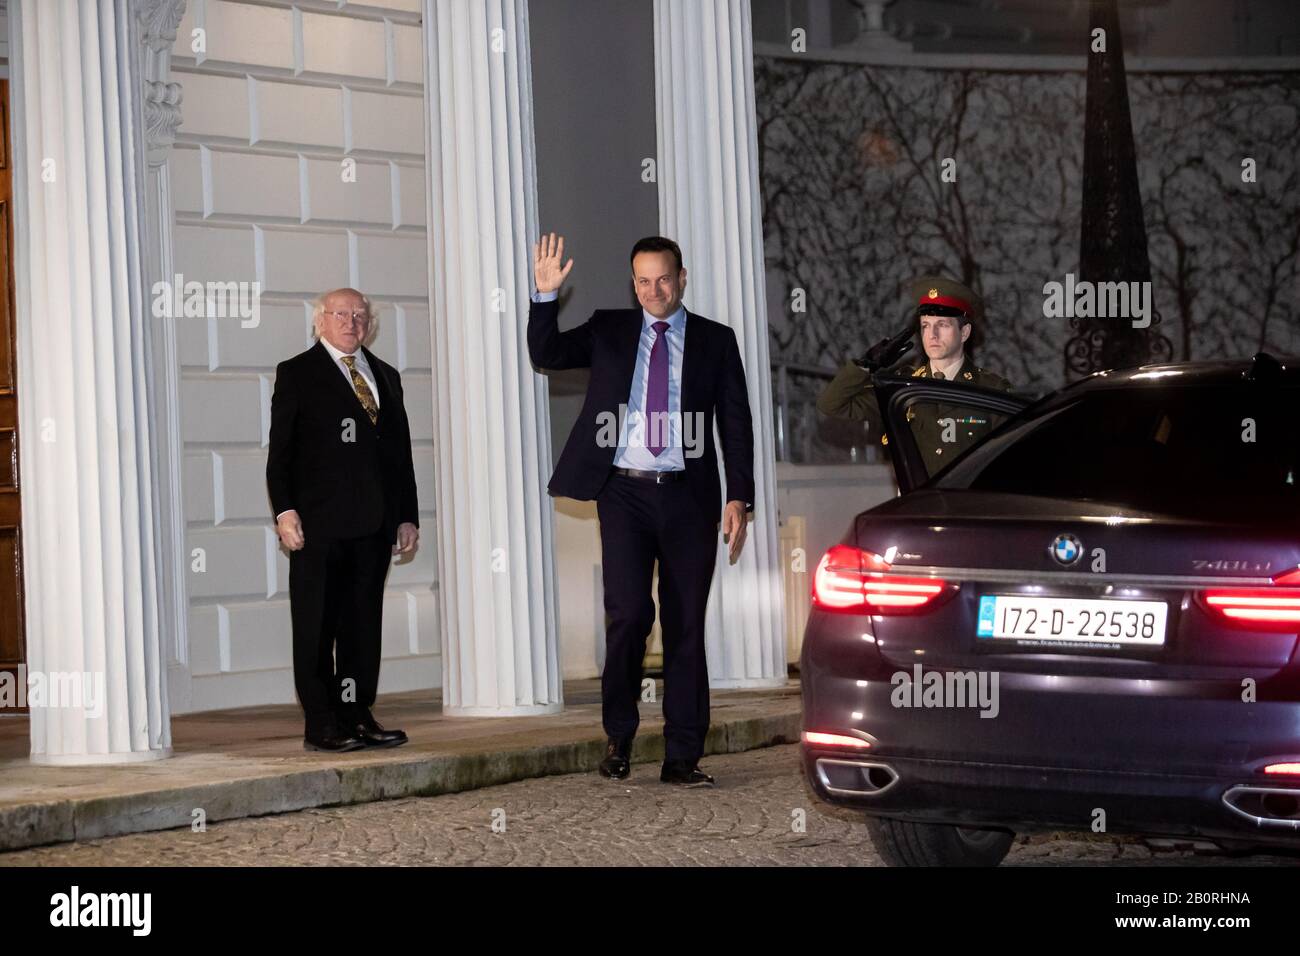 Dublin. 21st Feb, 2020. Irish Prime Minister Leo Varadkar (C) leaves the official residence of the Irish president after tendering his resignation to Irish President Michael D. Higgins (L) in Dublin, Ireland, Feb. 20, 2020. The newly formed lower house of the Irish parliament failed to elect a new prime minister for the country during its first sitting held here on Thursday, reported Irish national radio and television broadcaster RTE. Credit: Xinhua/Alamy Live News Stock Photo